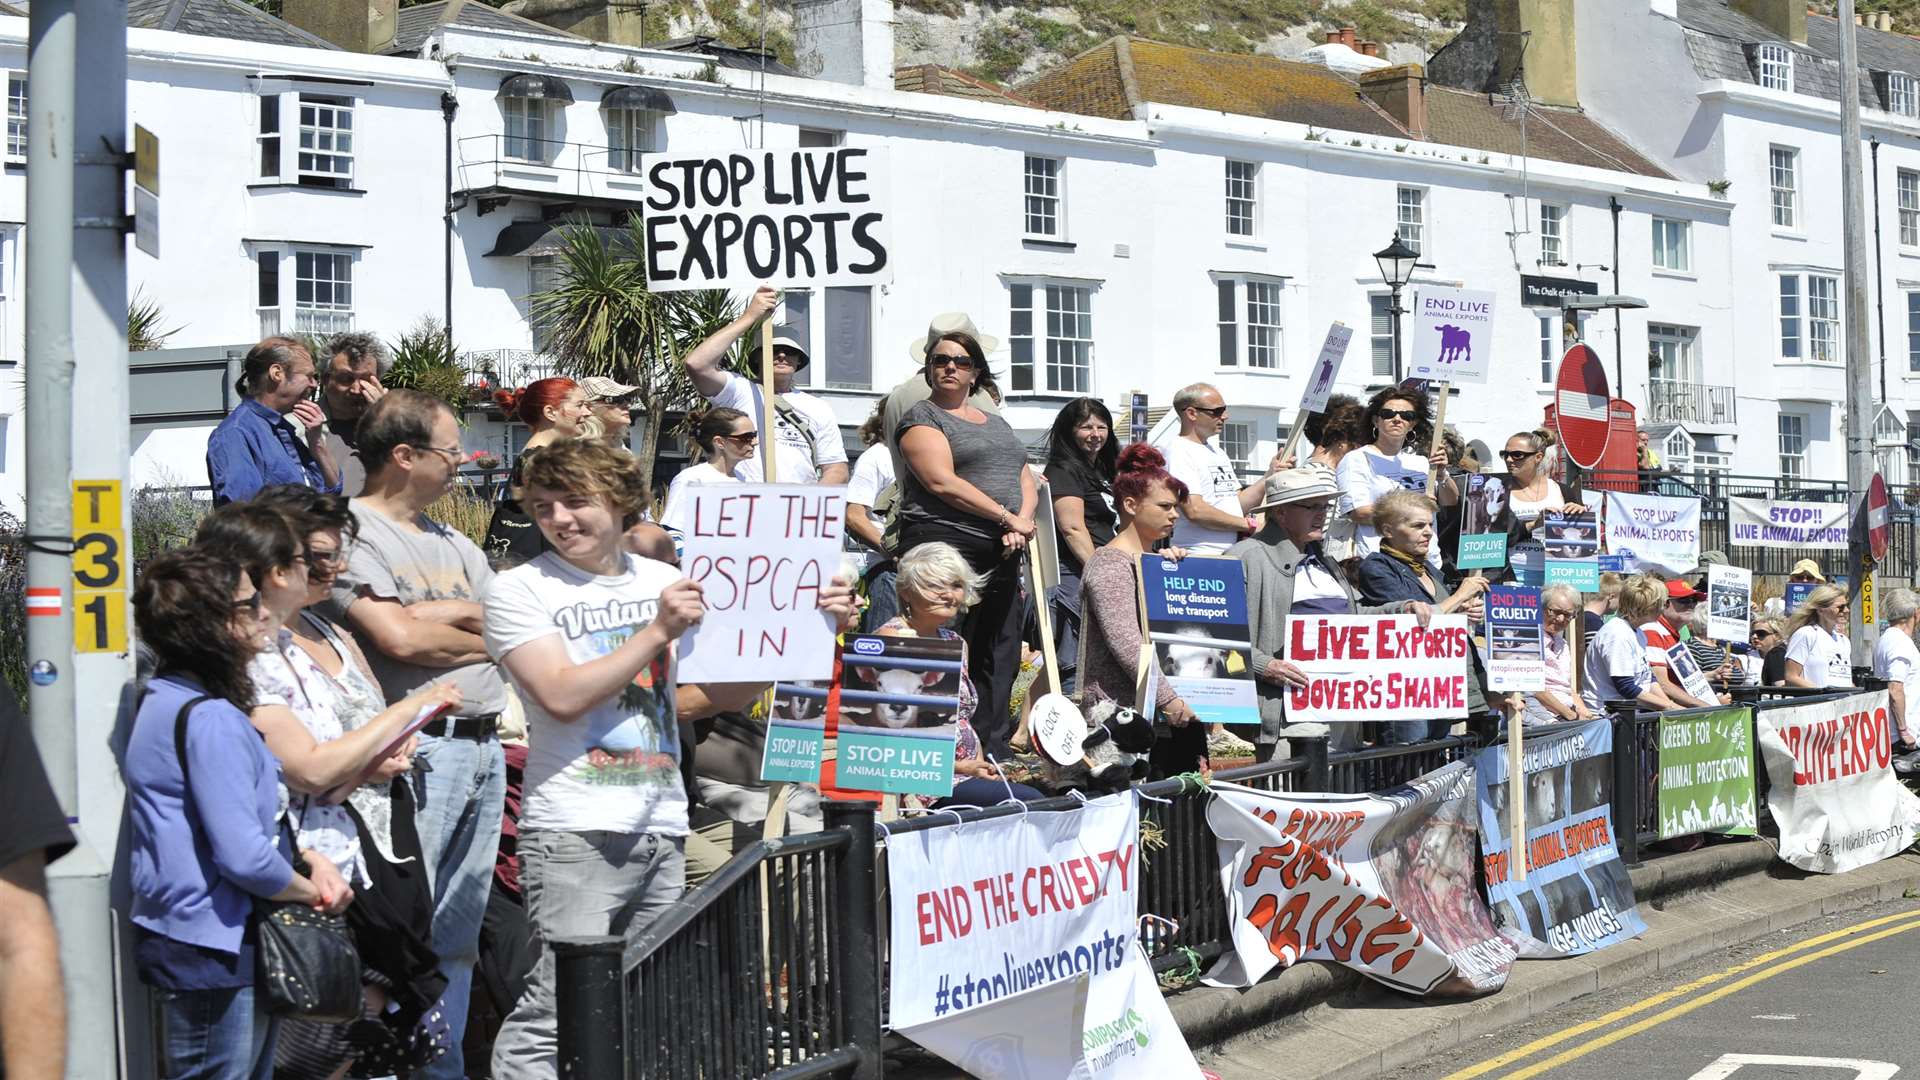 A previous demonstration against live animal exports